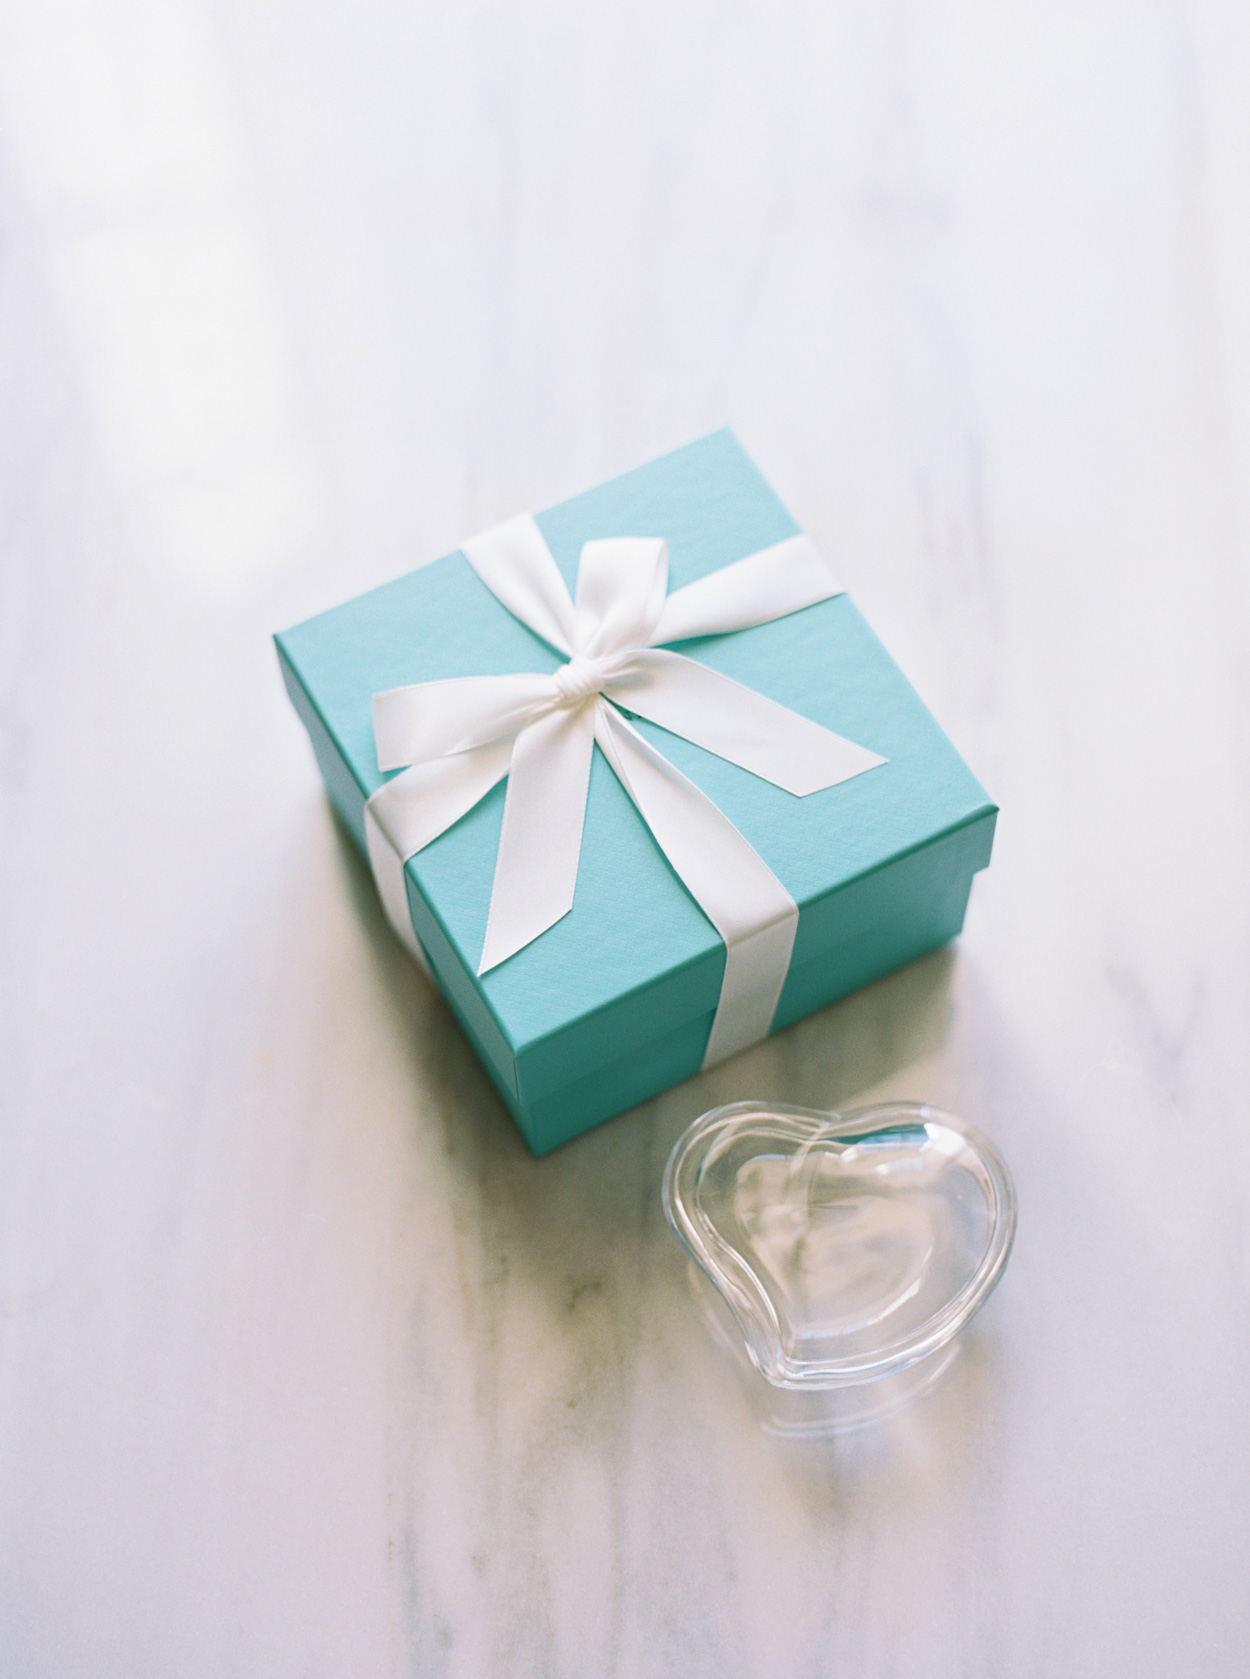 Tiffany's gift ideas for bridesmaids on wedding day